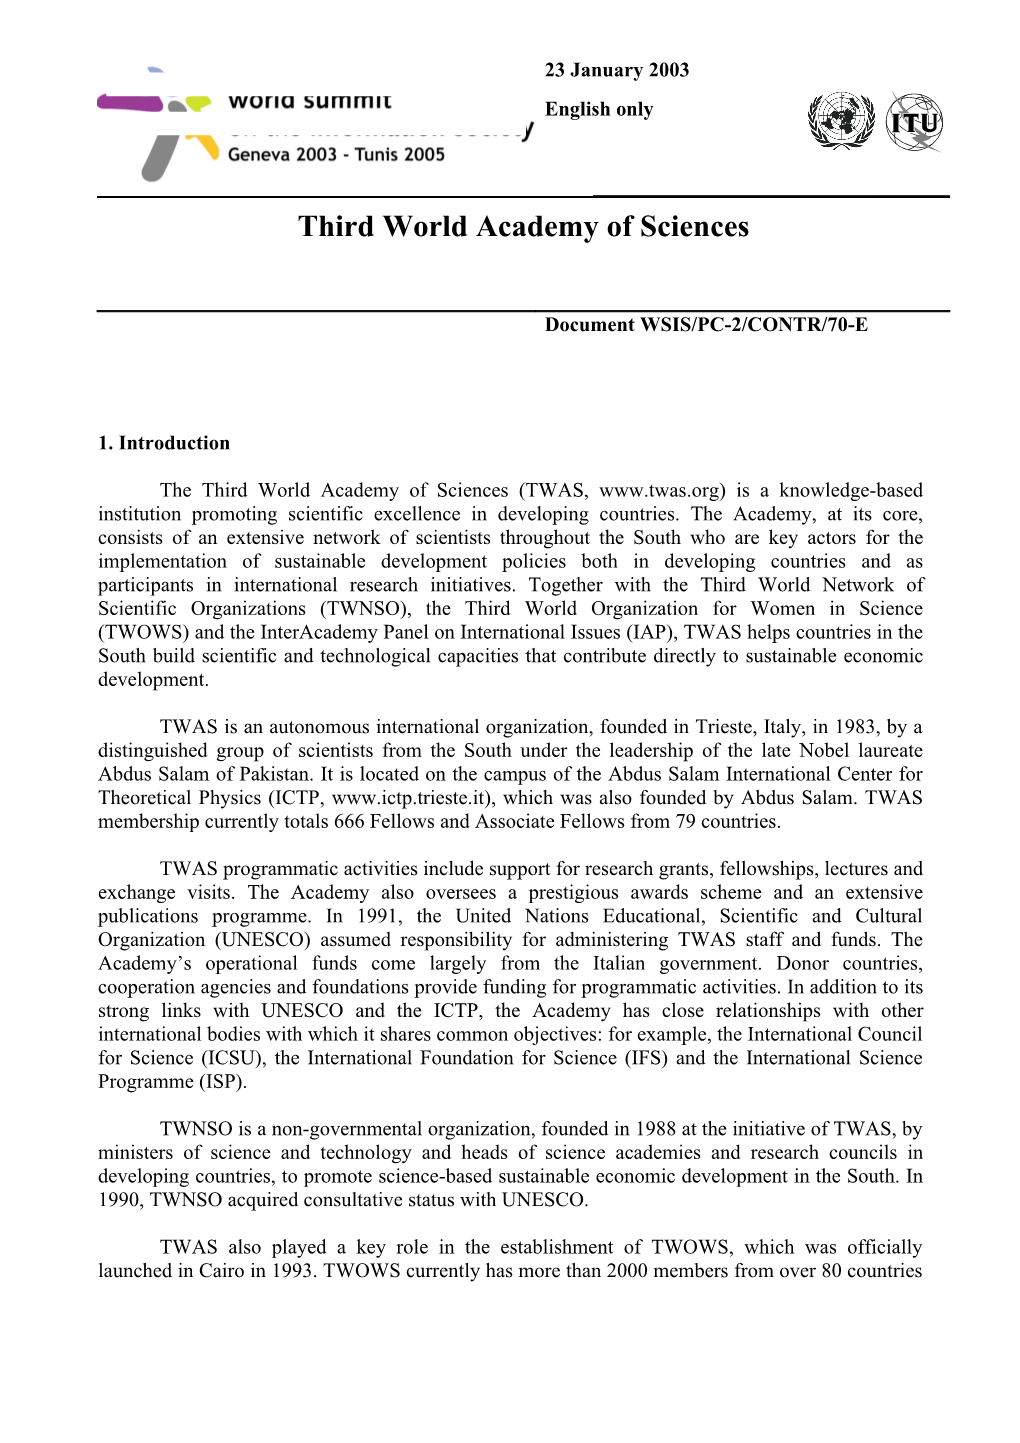 Draft Twas Document for the Second Prepcom of the World Summit Oin the Information Society